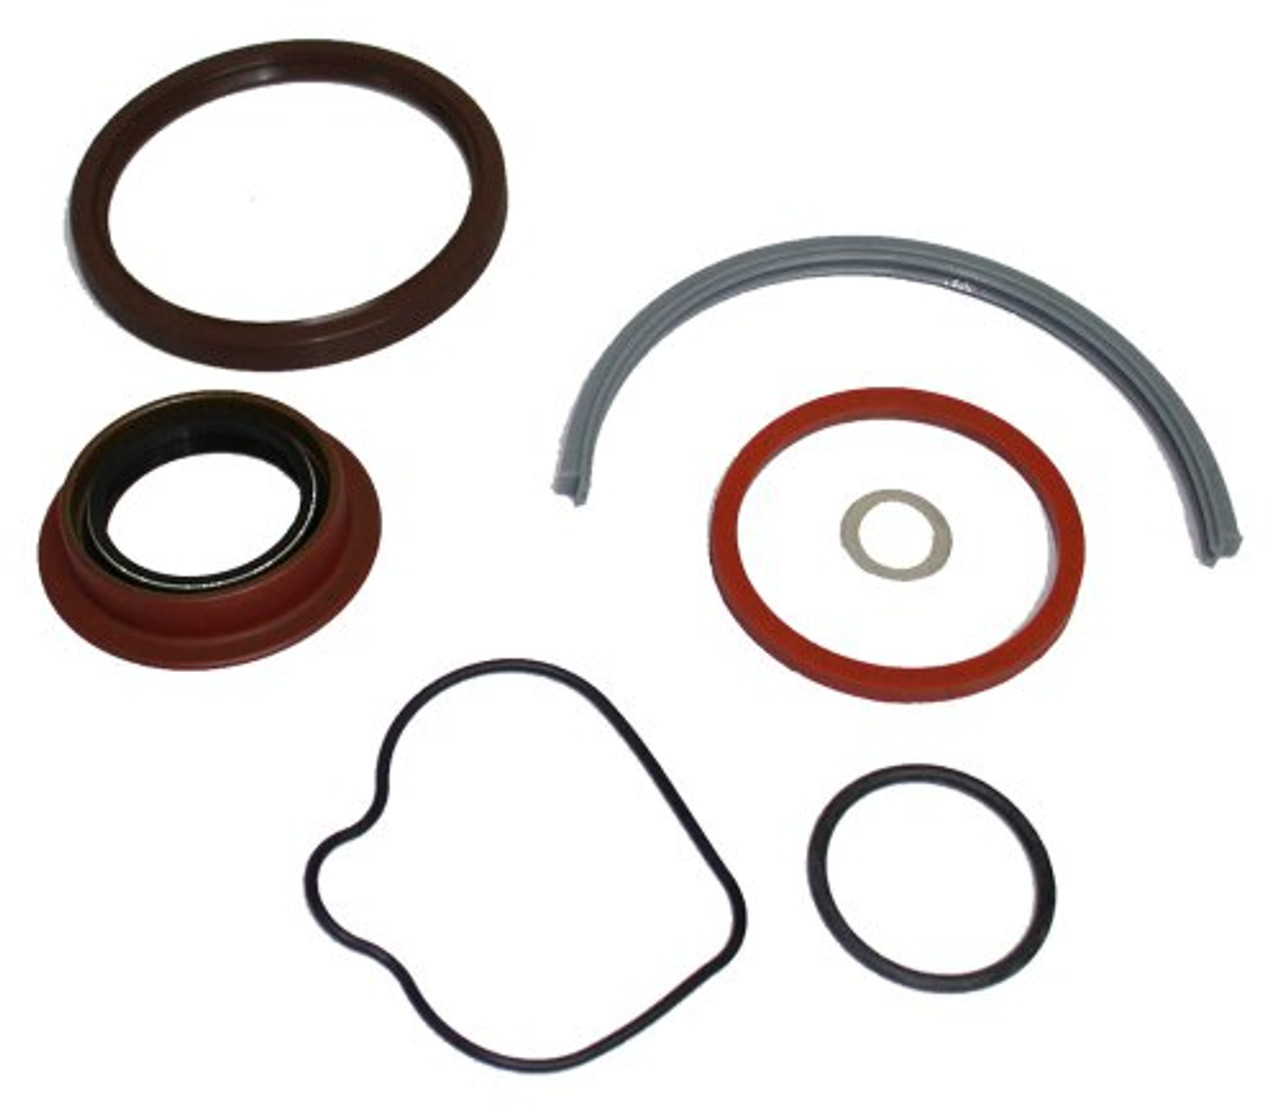 Lower Gasket Set - 1991 Lincoln Continental 3.8L Engine Parts # LGS4116ZE13